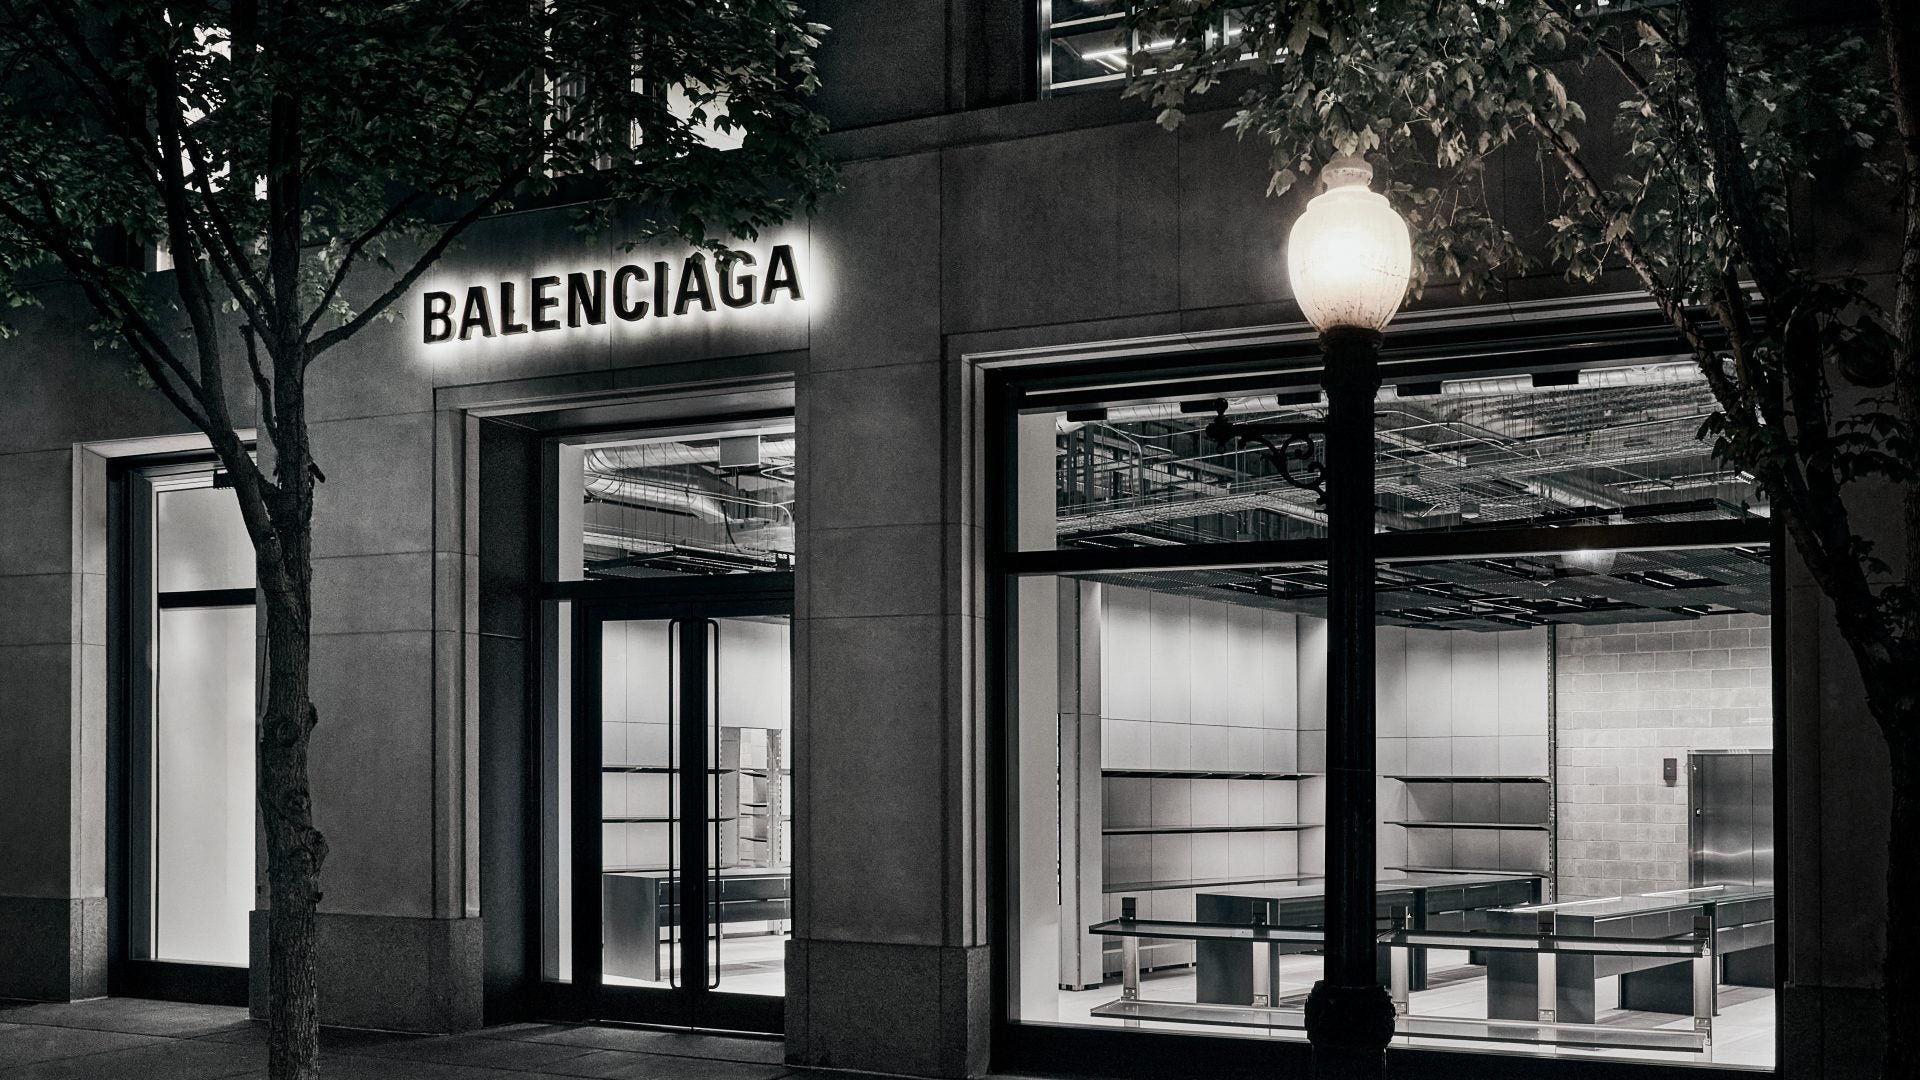 A Balenciaga Storefront Has Opened In Chicago